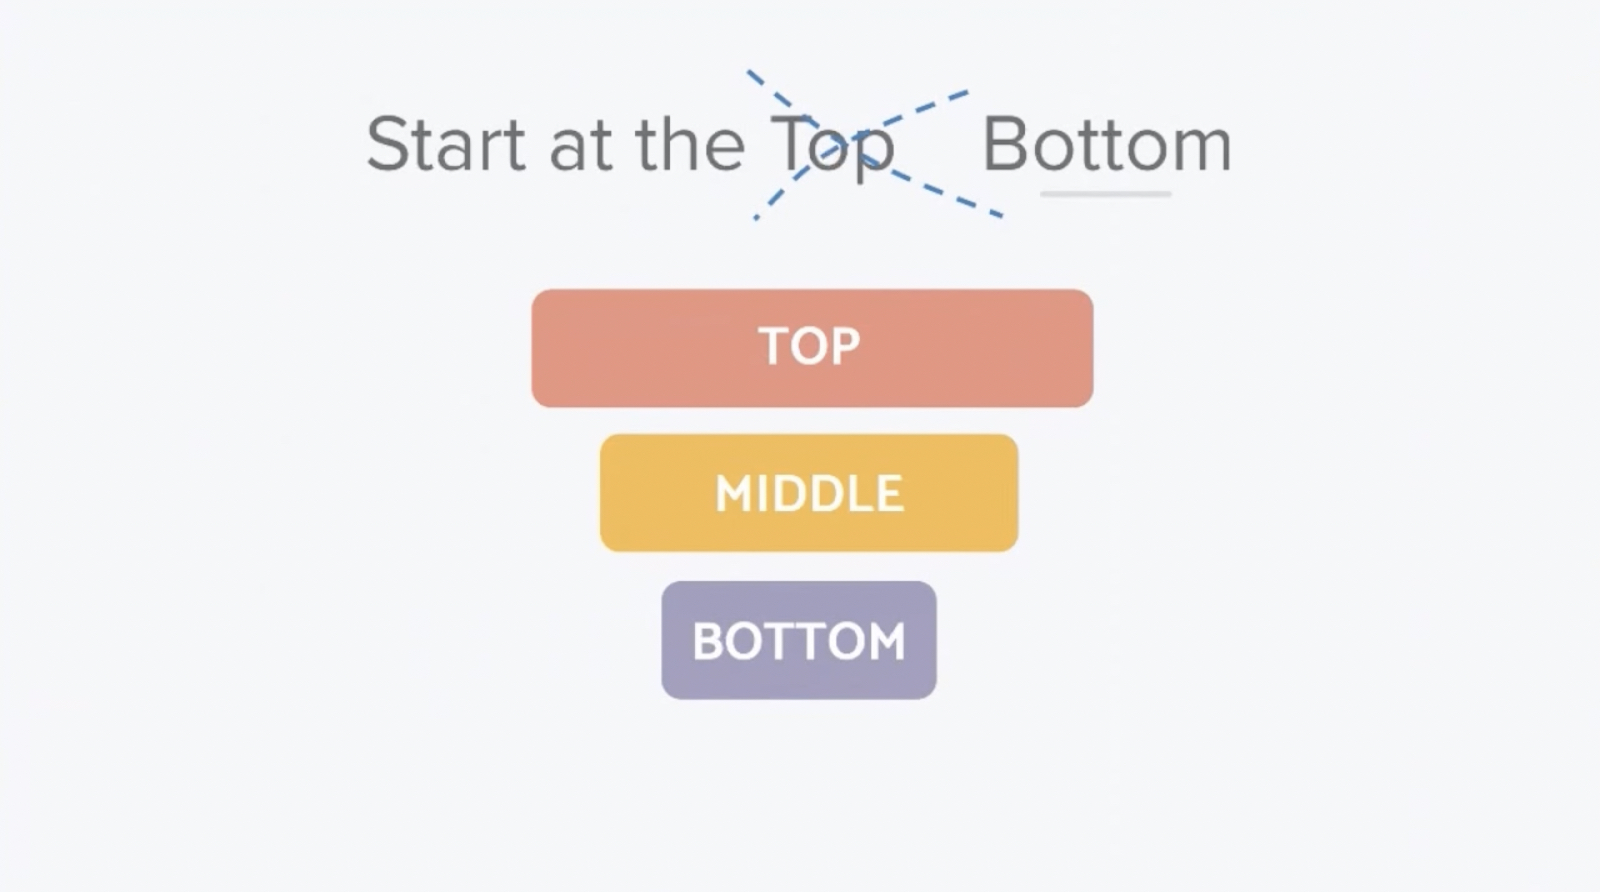 An image describing why a bottom of the funnel approach is better - by Paperflite